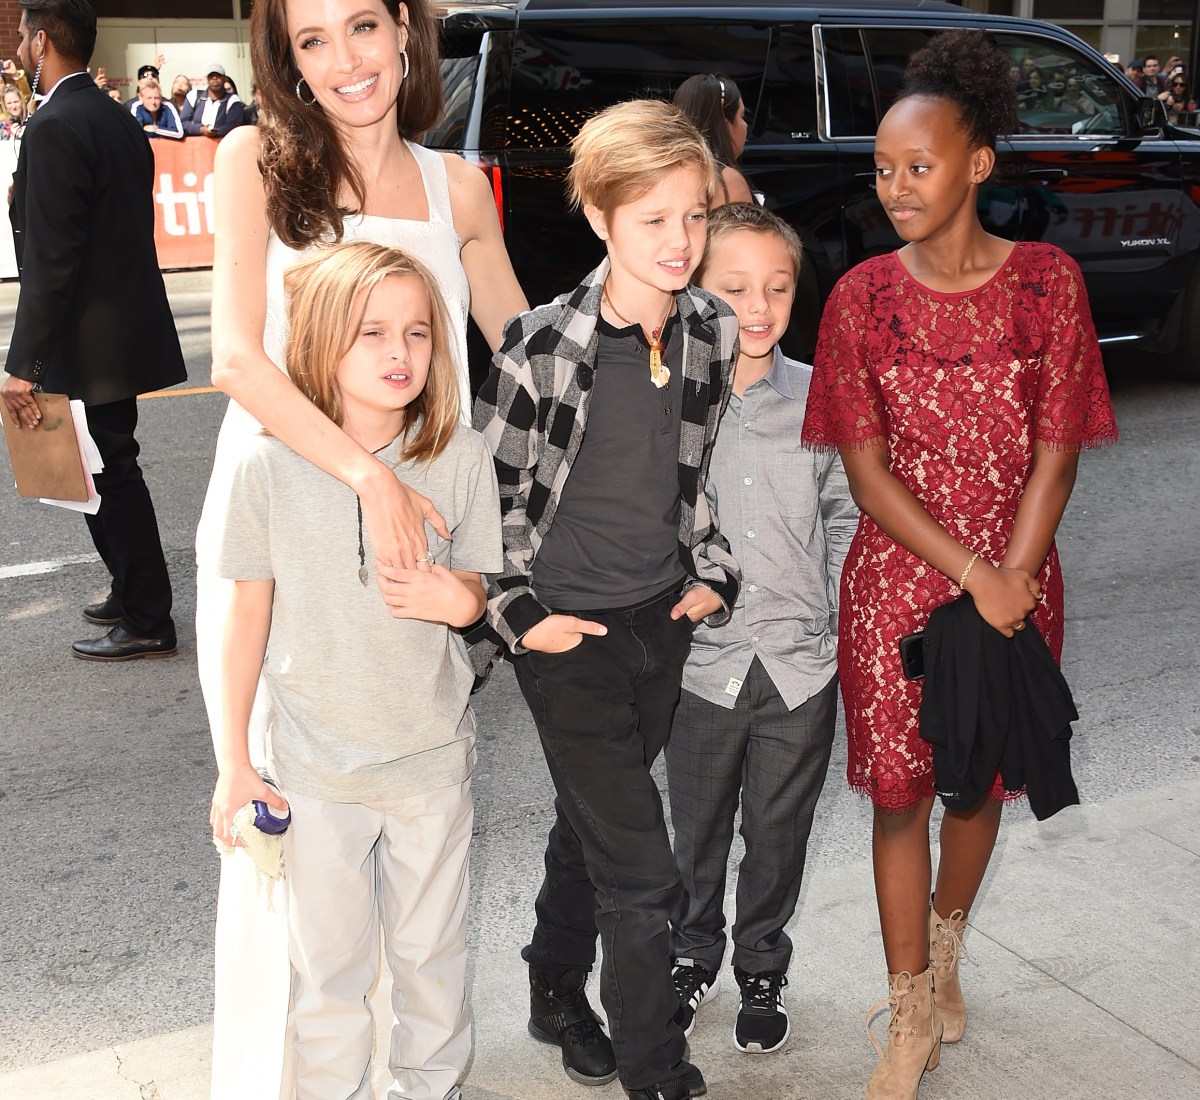 Shiloh JoliePitt Now Brad and Angelina's Child Is All Grown Up